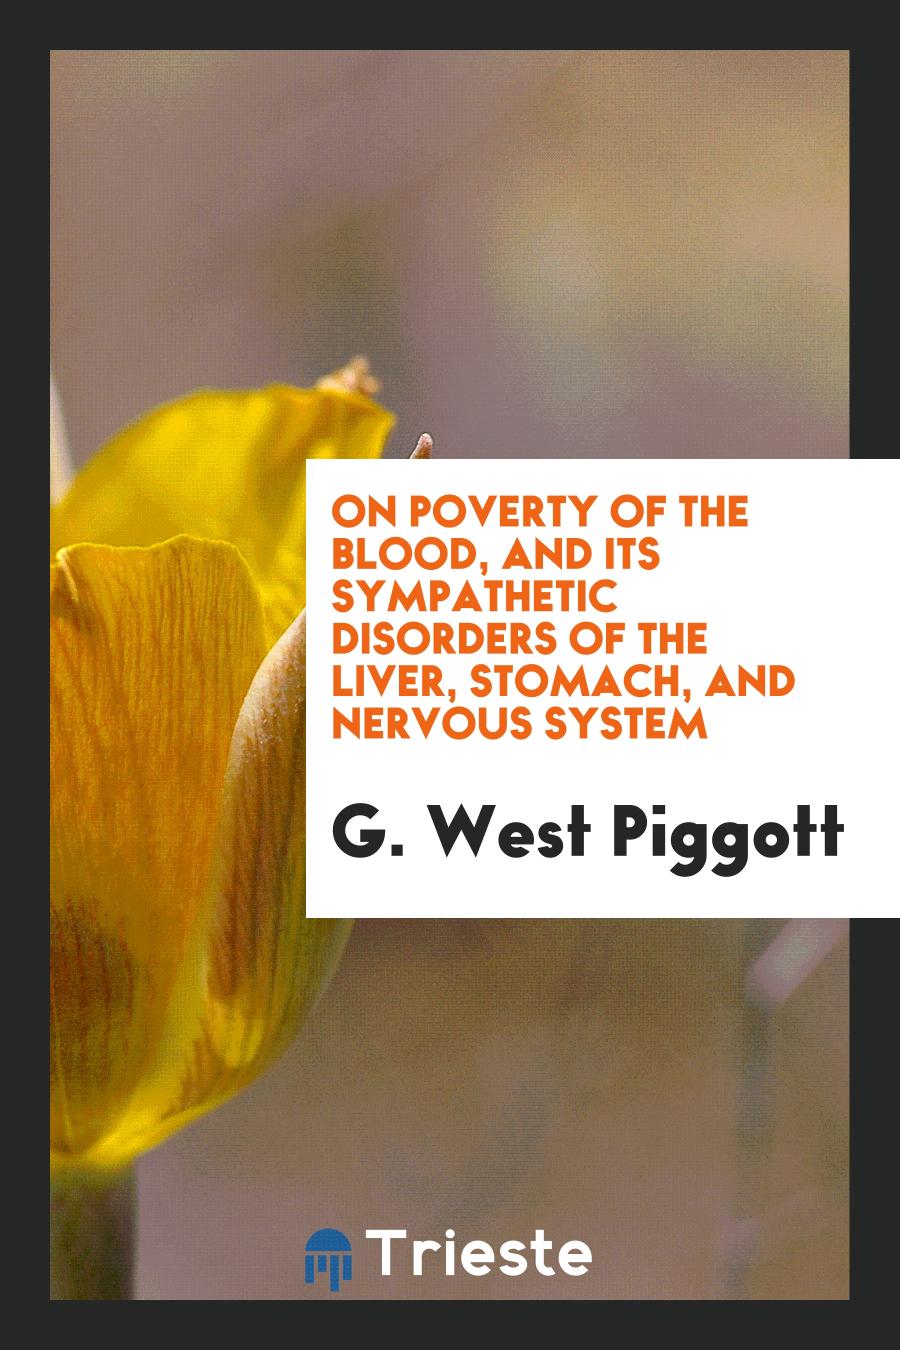 On Poverty of the Blood, and its Sympathetic Disorders of the Liver, Stomach, and Nervous System